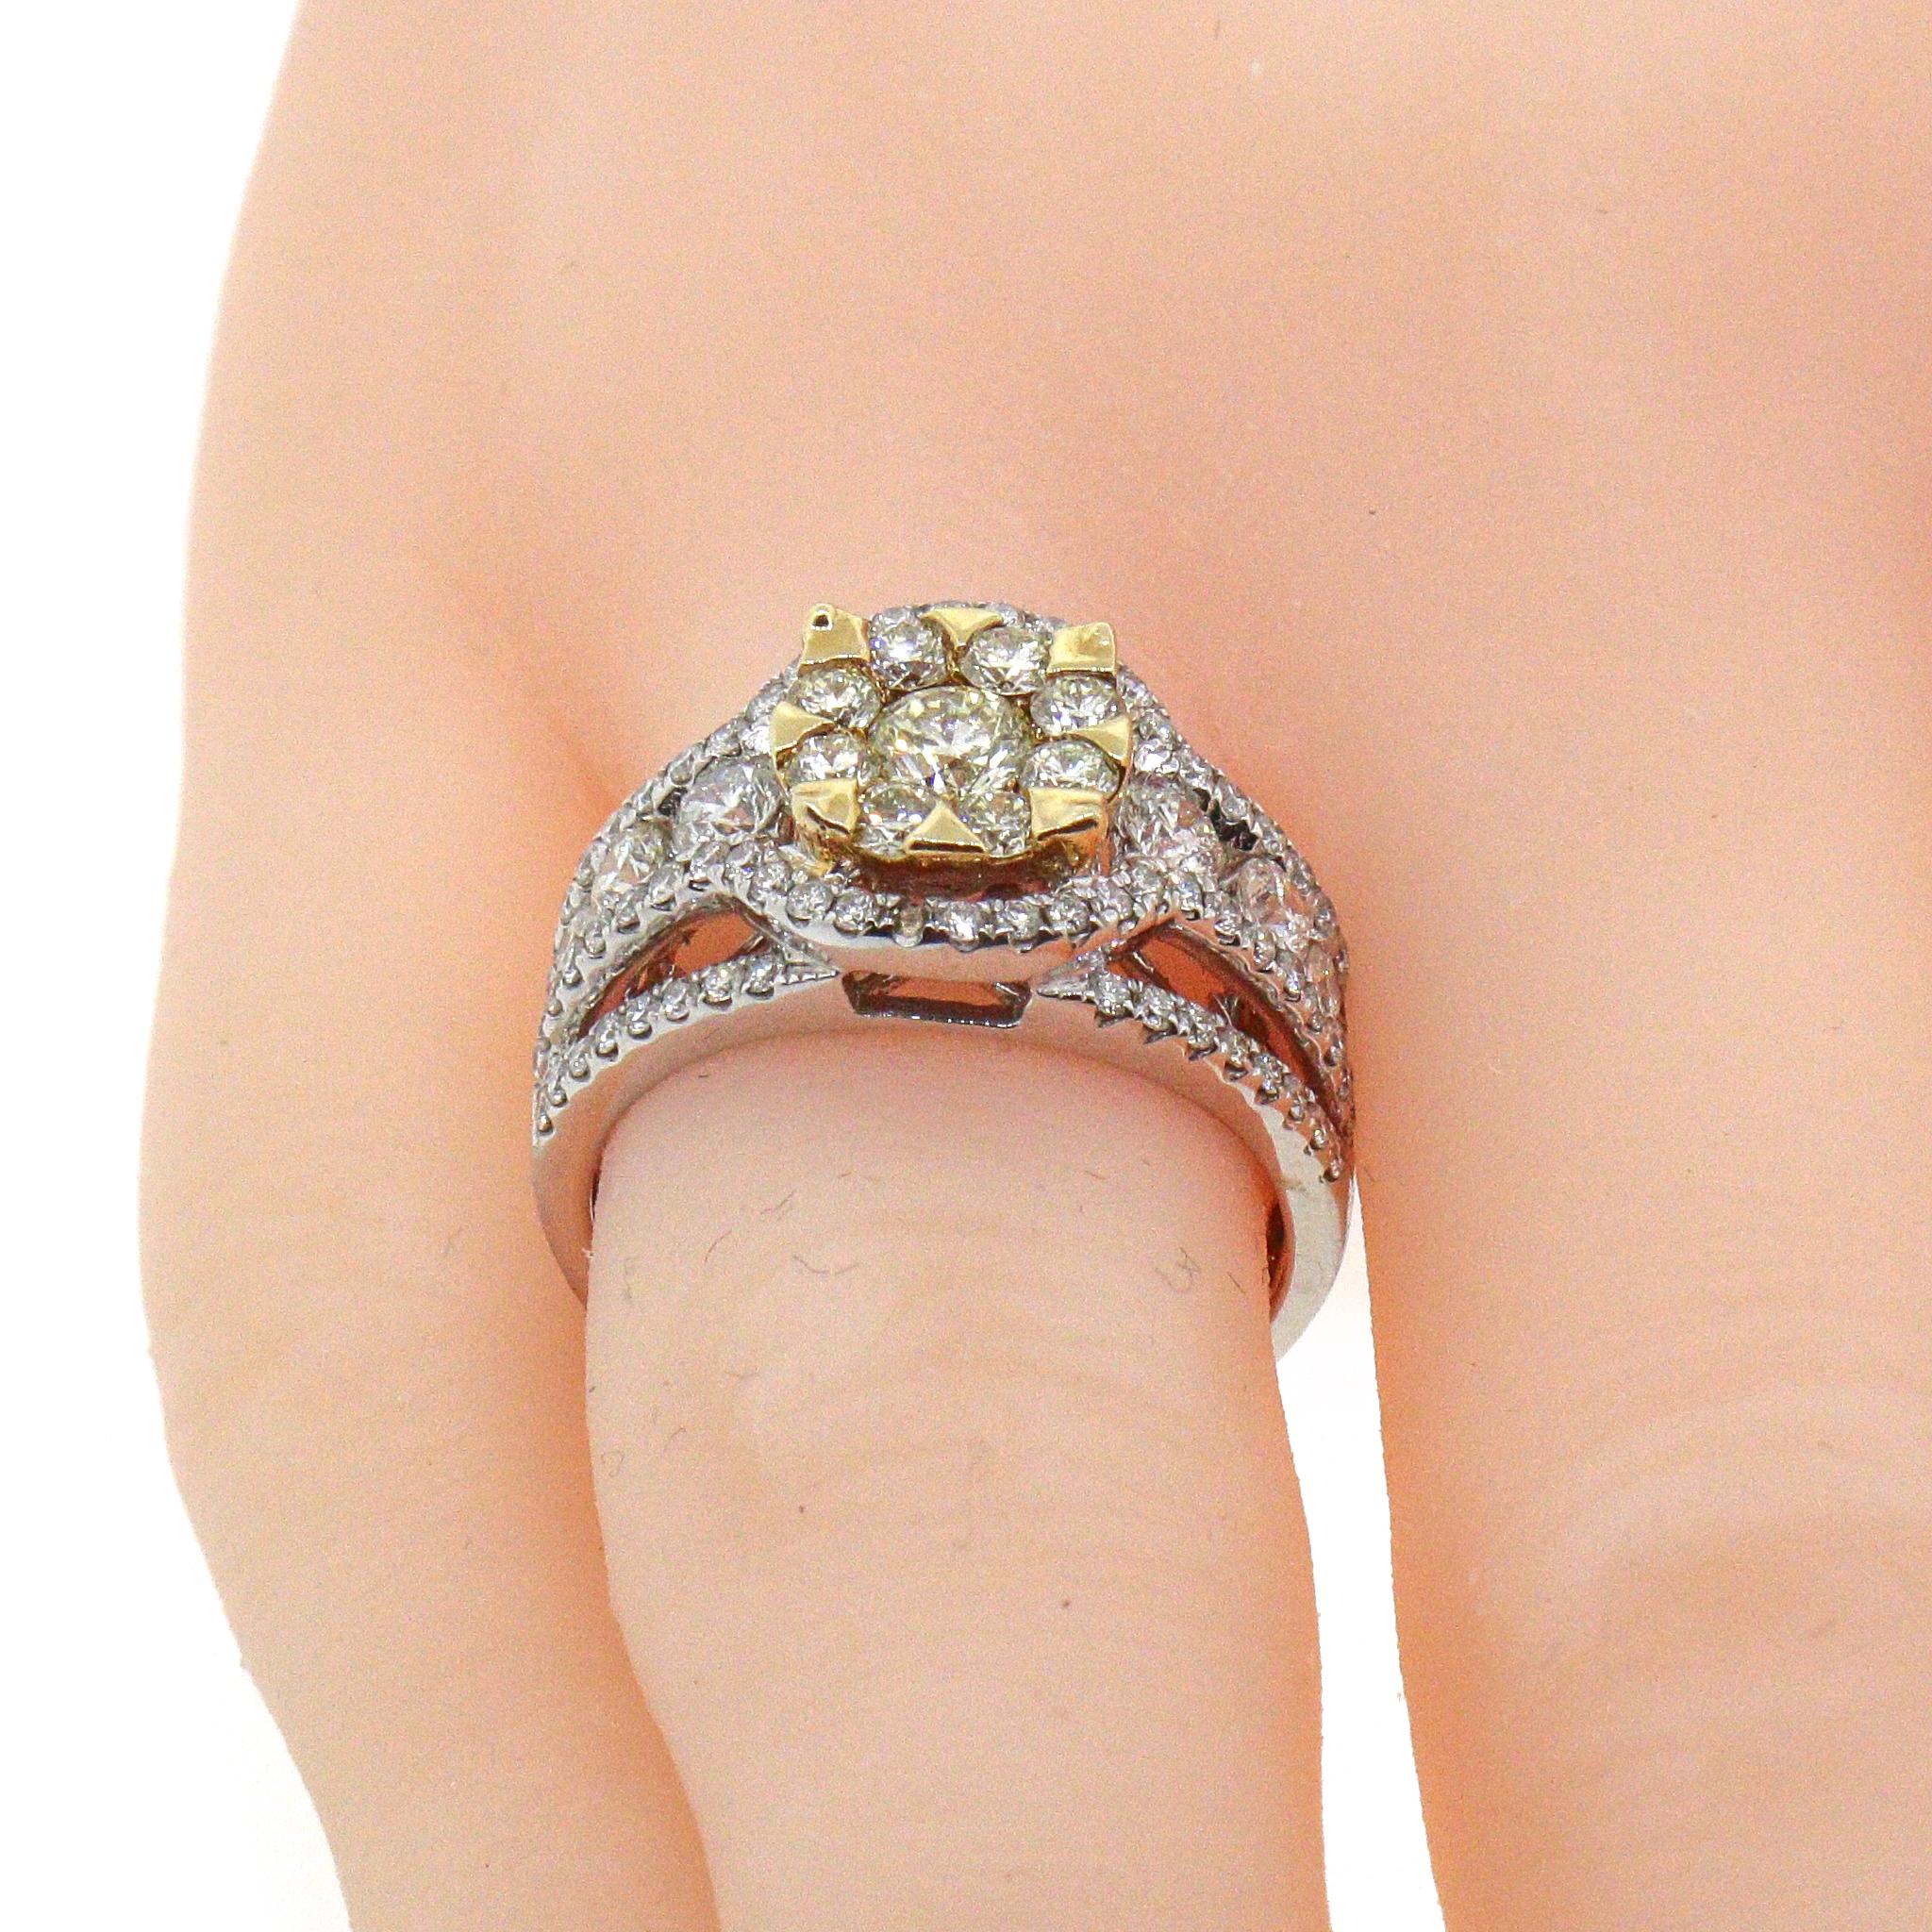 14 kt Yellow and White Gold
Diamond: 2.16 ct twd
Color: G
Clarity: SI1
Center Stone: Color K, Clarity: SI
Ring Size: 7.25
Total Weight: 7.13 grams
Preowned